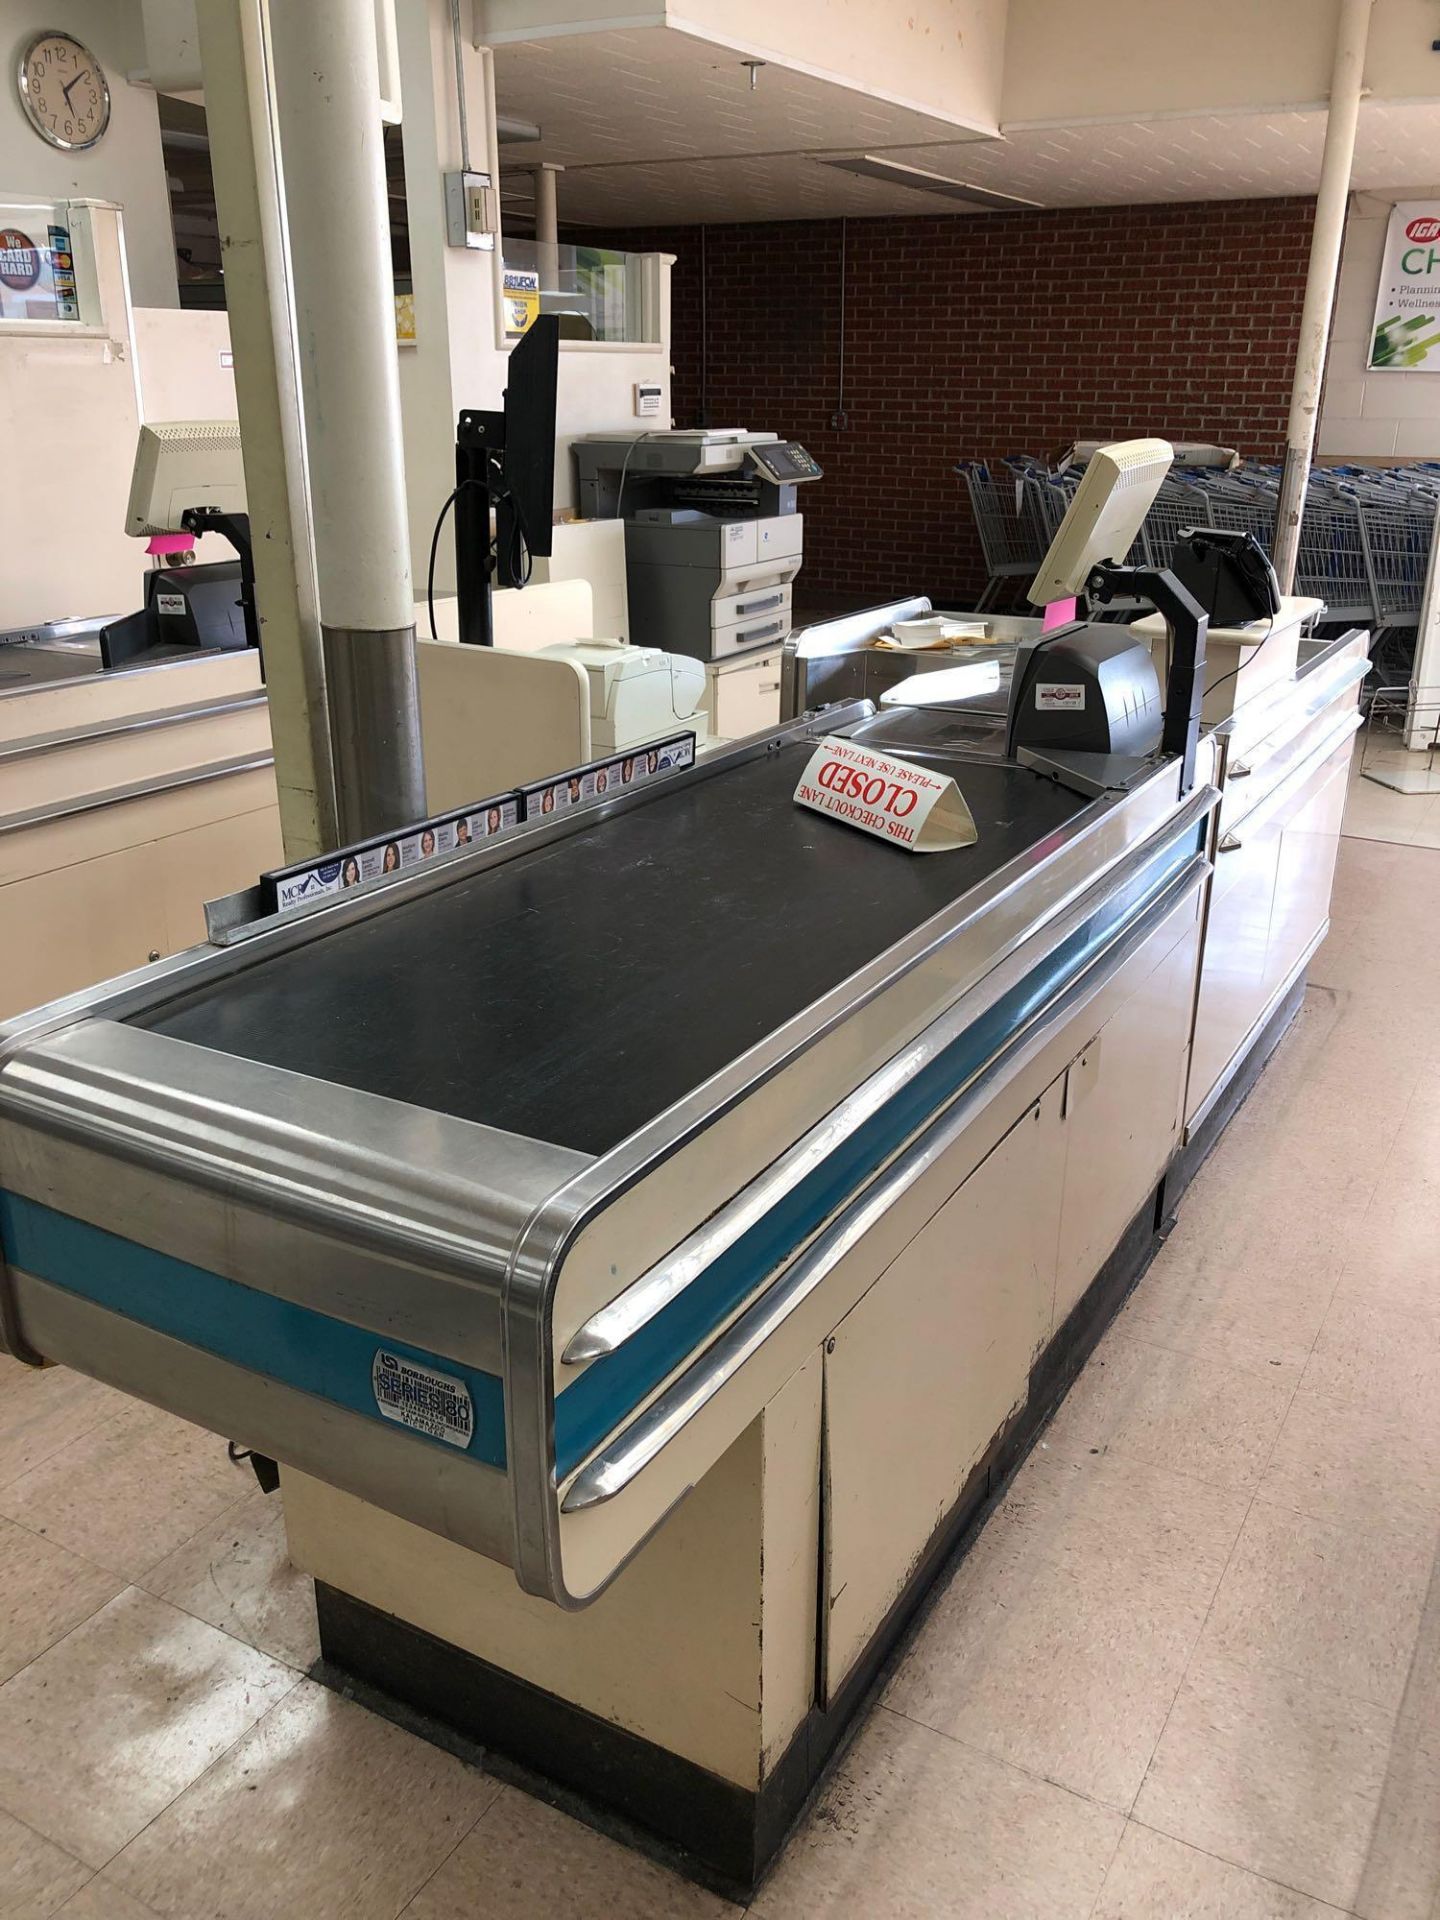 Series 80 Boroughs Conveyer Checkout System - Image 2 of 6